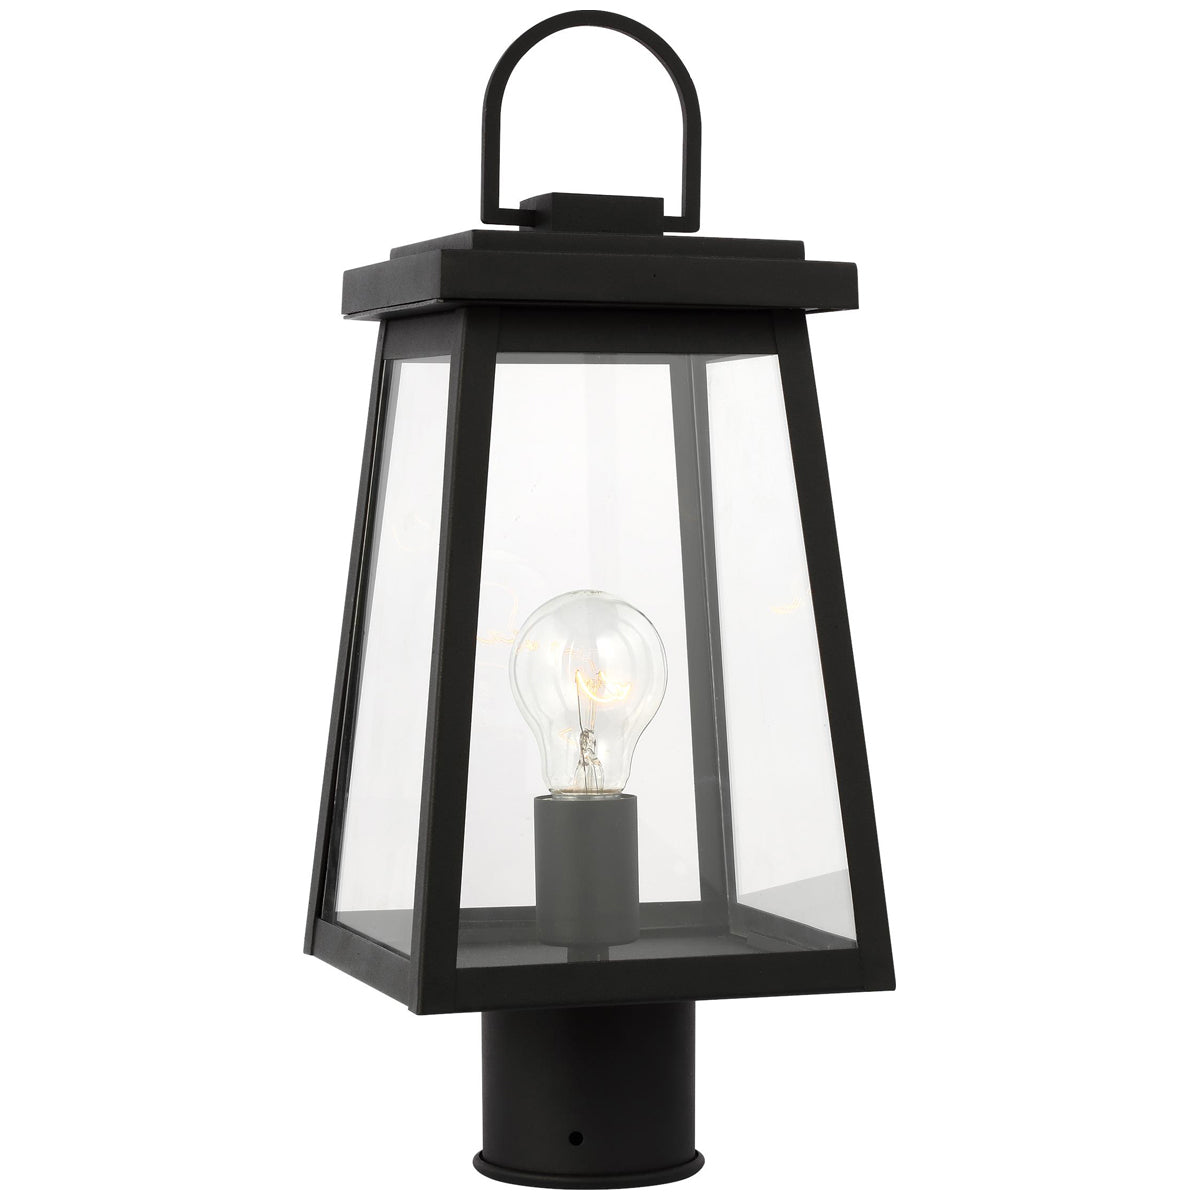 Sea Gull Lighting Founders 1-Light Outdoor Post Lantern without Bulb